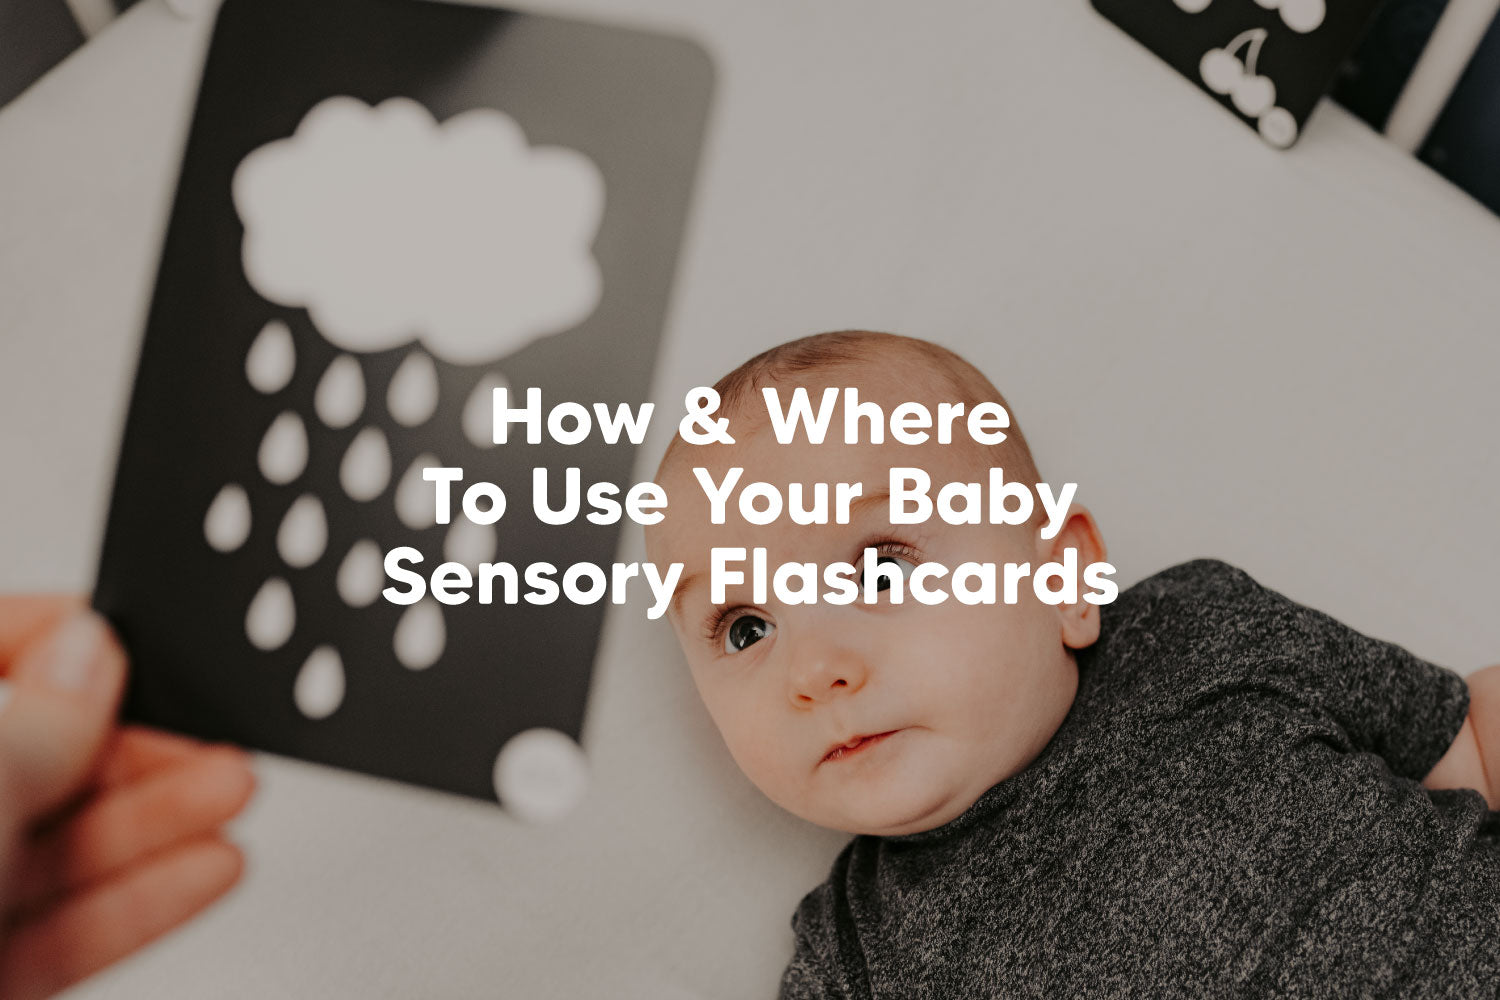 How & Where To Use Your Baby Sensory Flashcards